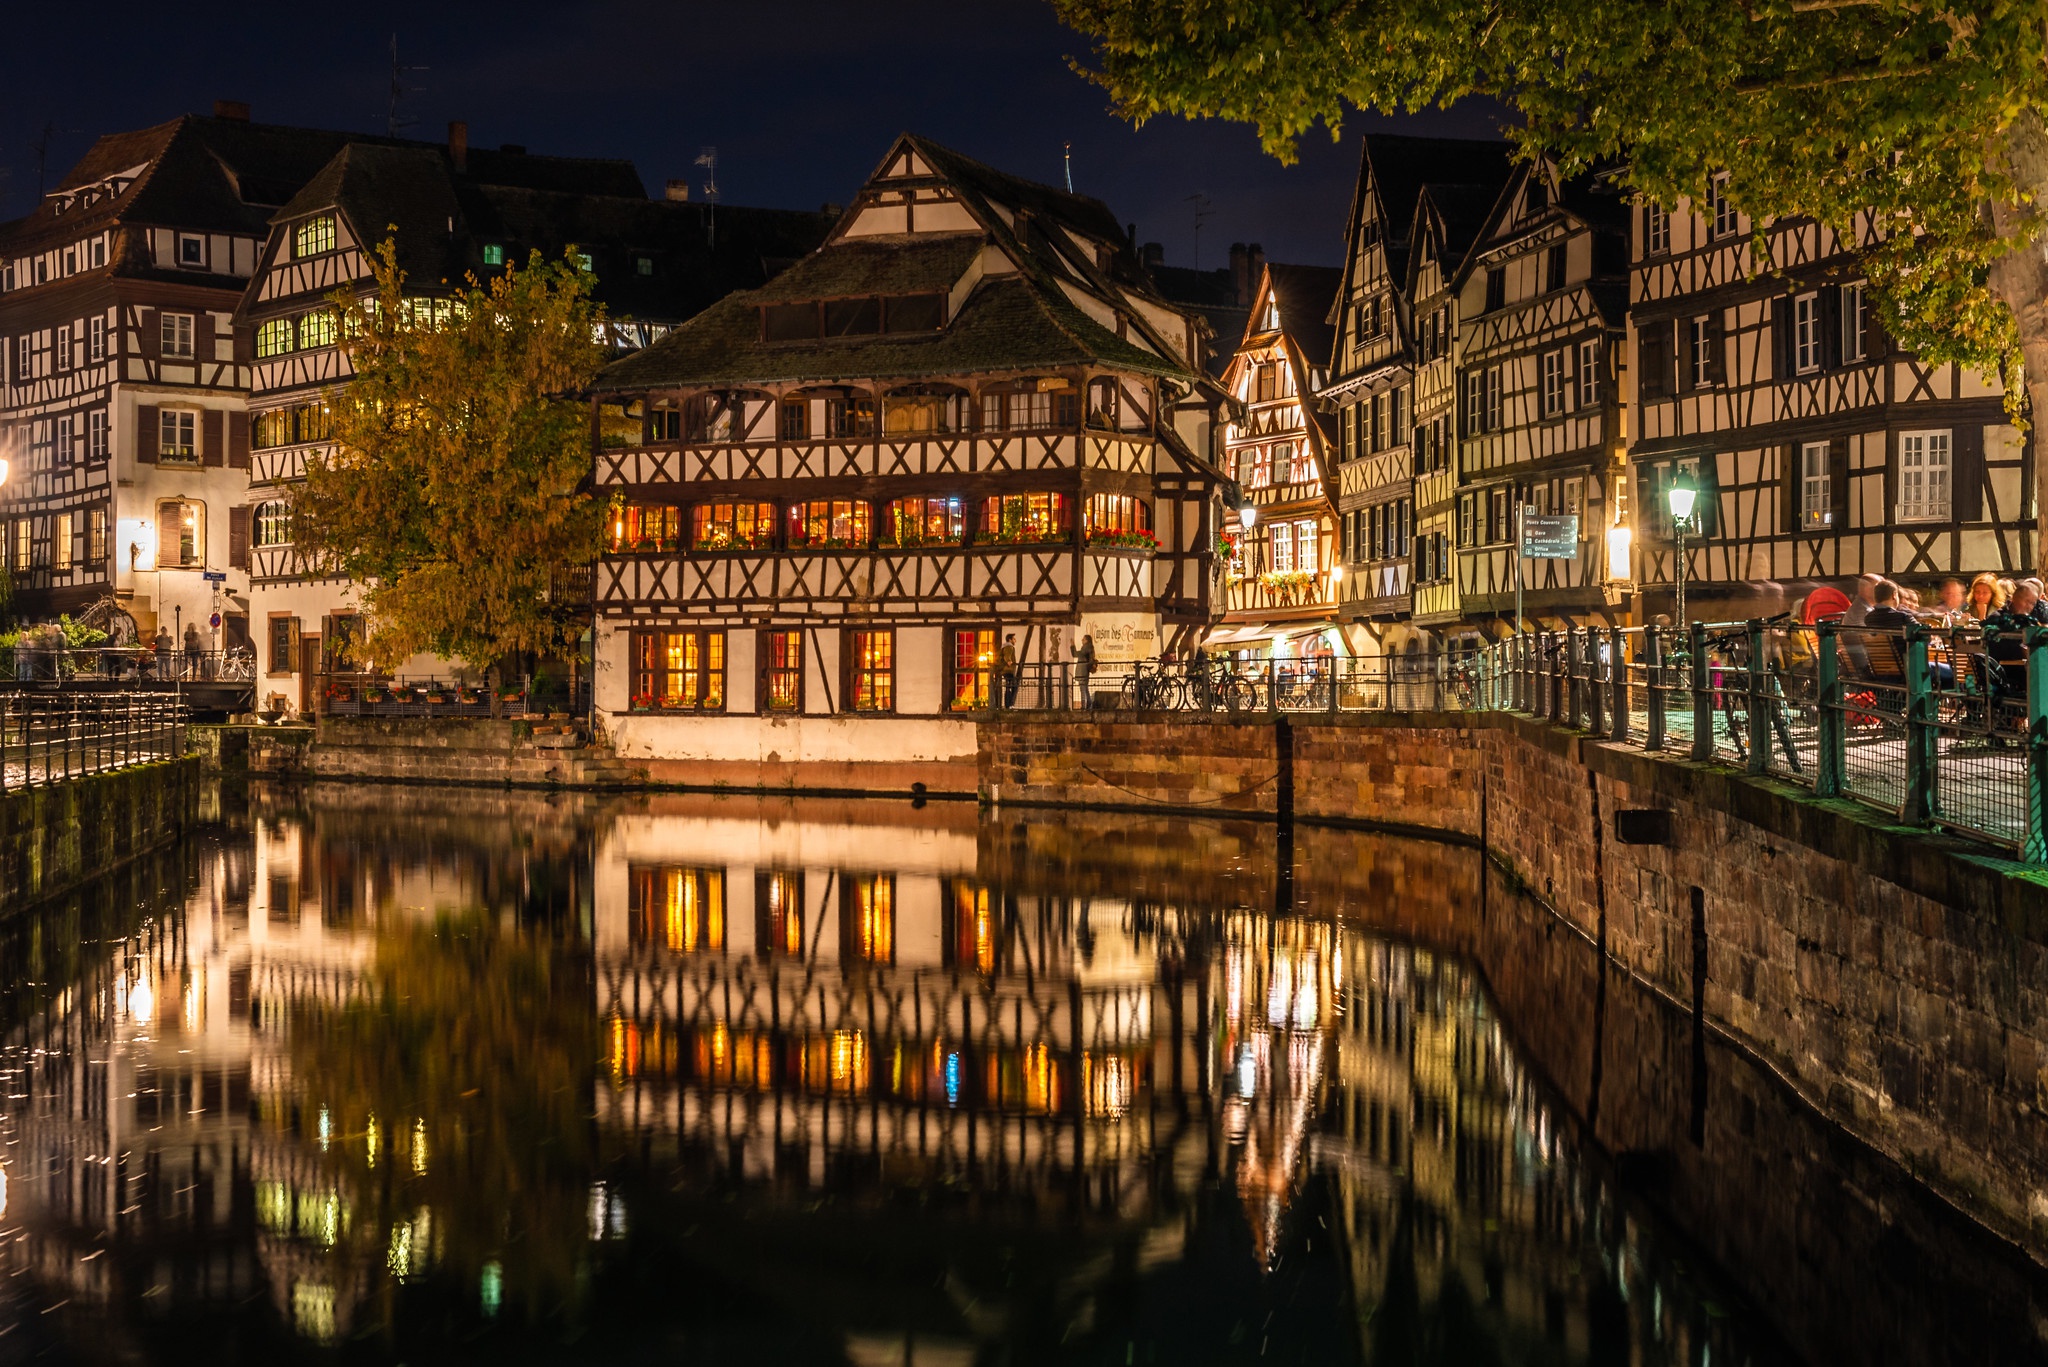 man made, strasbourg, building, canal, france, house, reflection, cities UHD